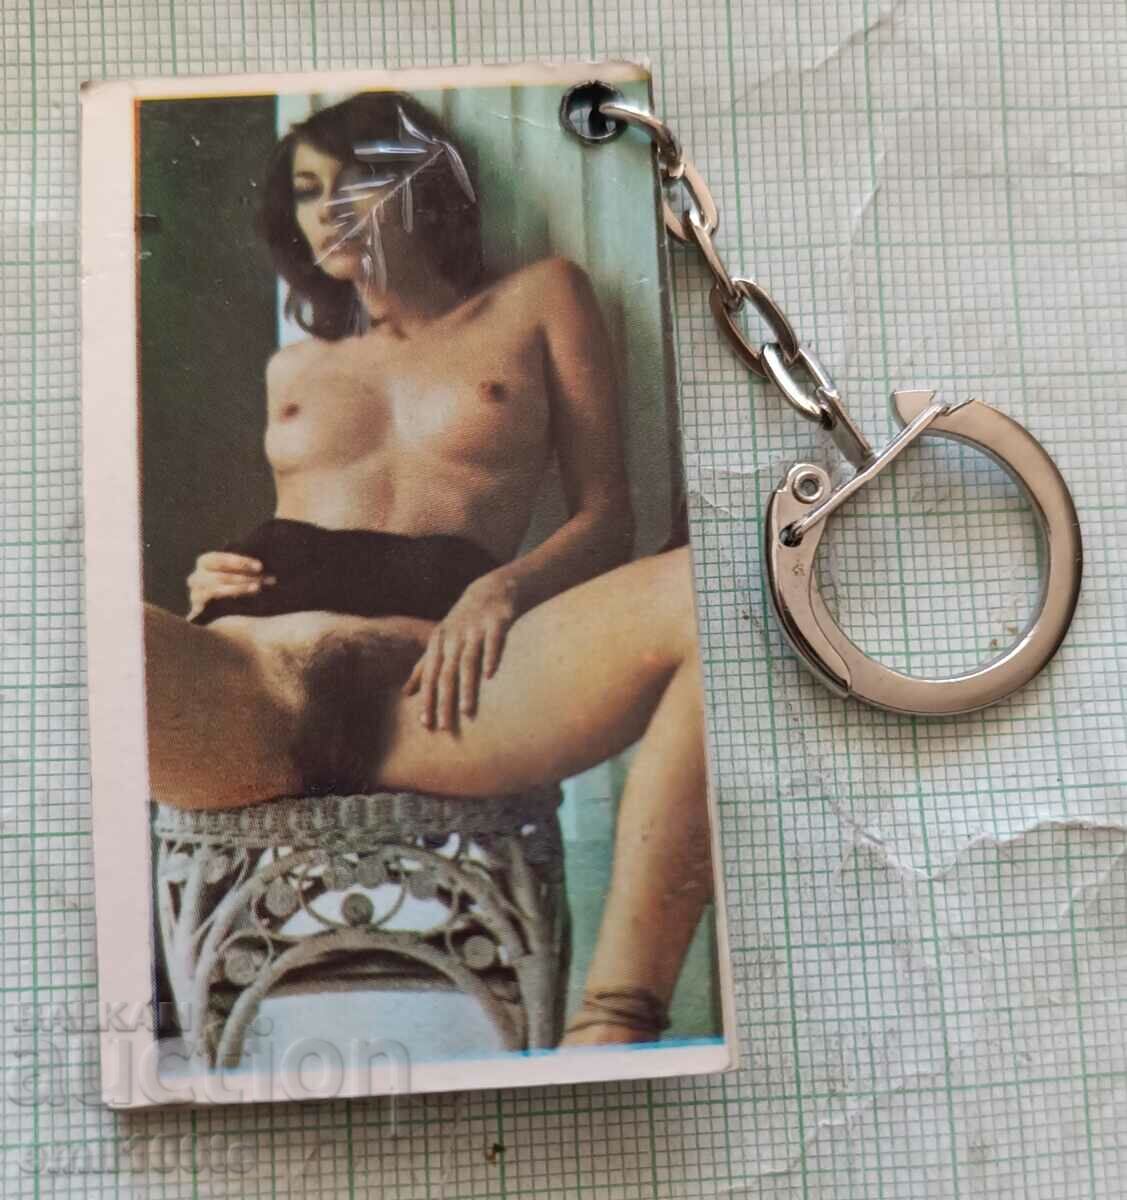 Keychain Erotic Nude Babes From The 70s; The 80s